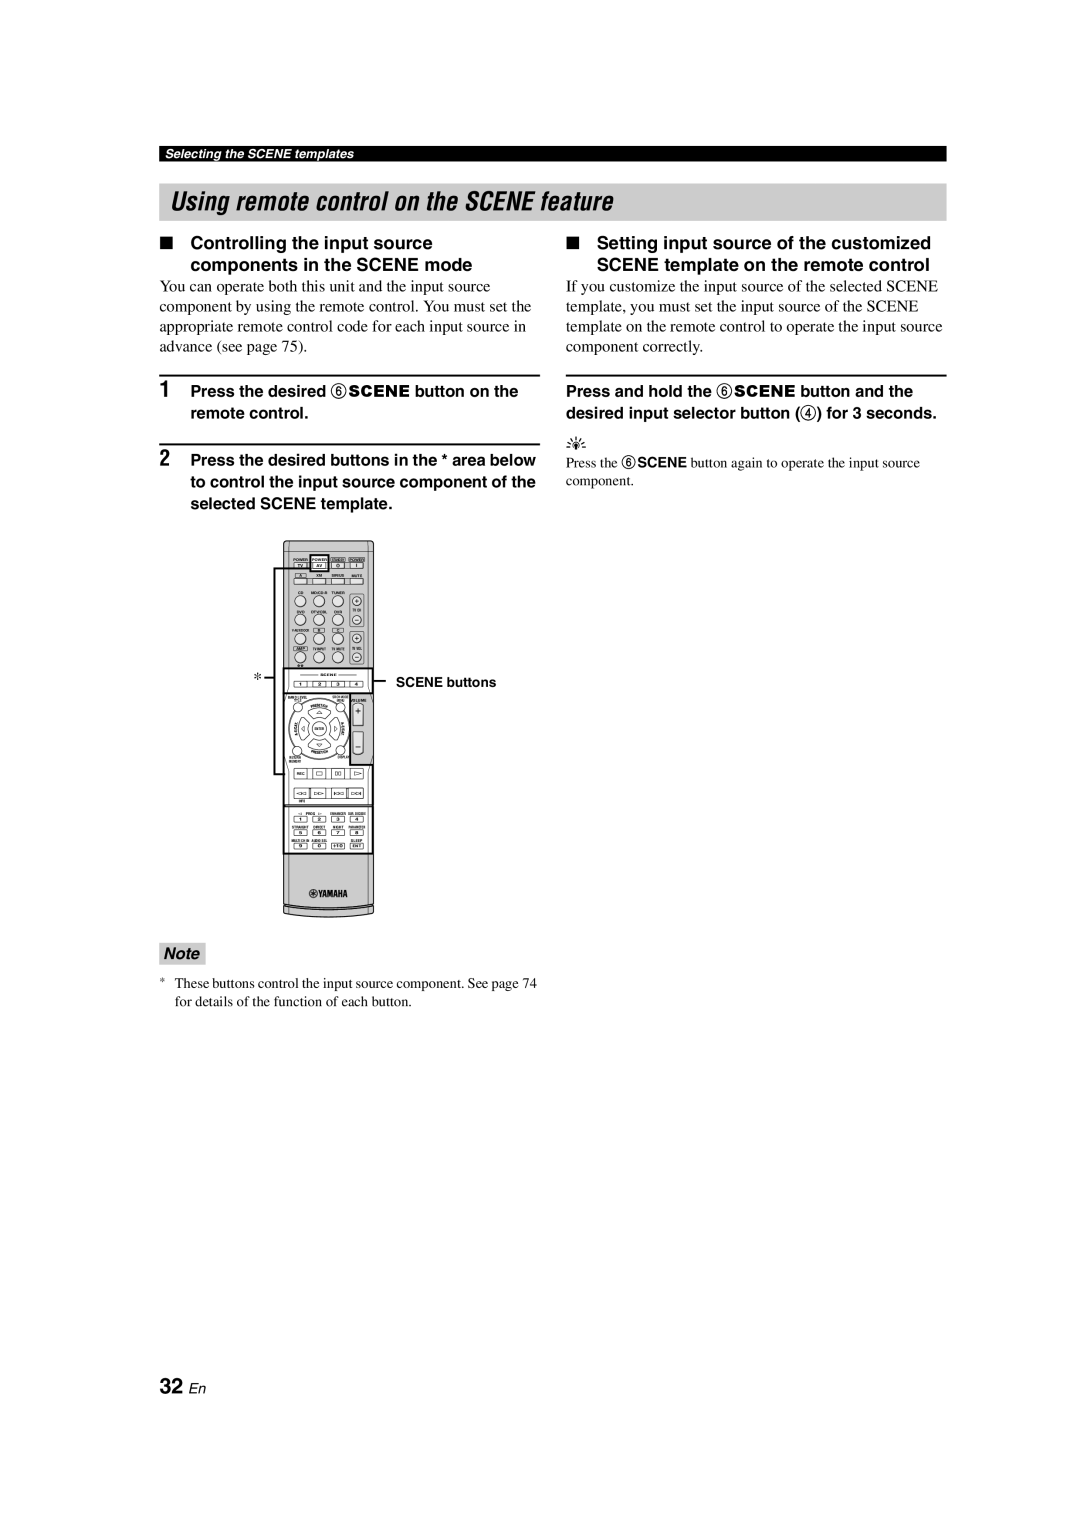 Yamaha RX-V463 owner manual Using remote control on the SCENE feature, 32 En, Controlling the input source 